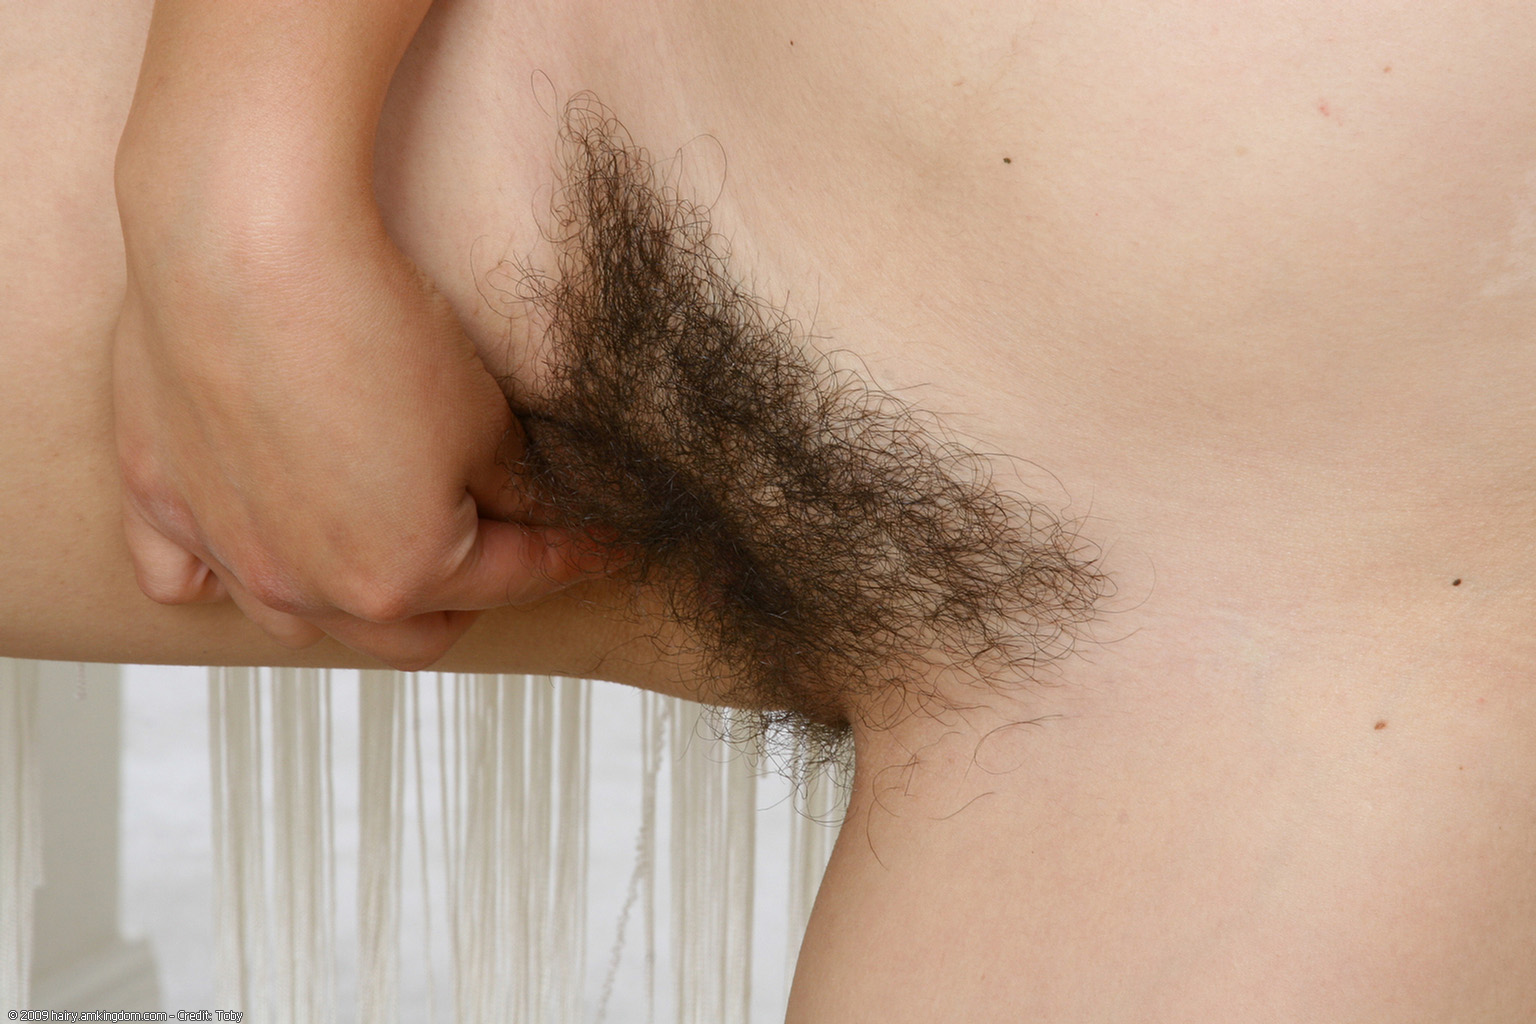 Carly Atk Natural Hairy « ATK Natural And Hairy « Free ATK Pictures @ Bravo ATK